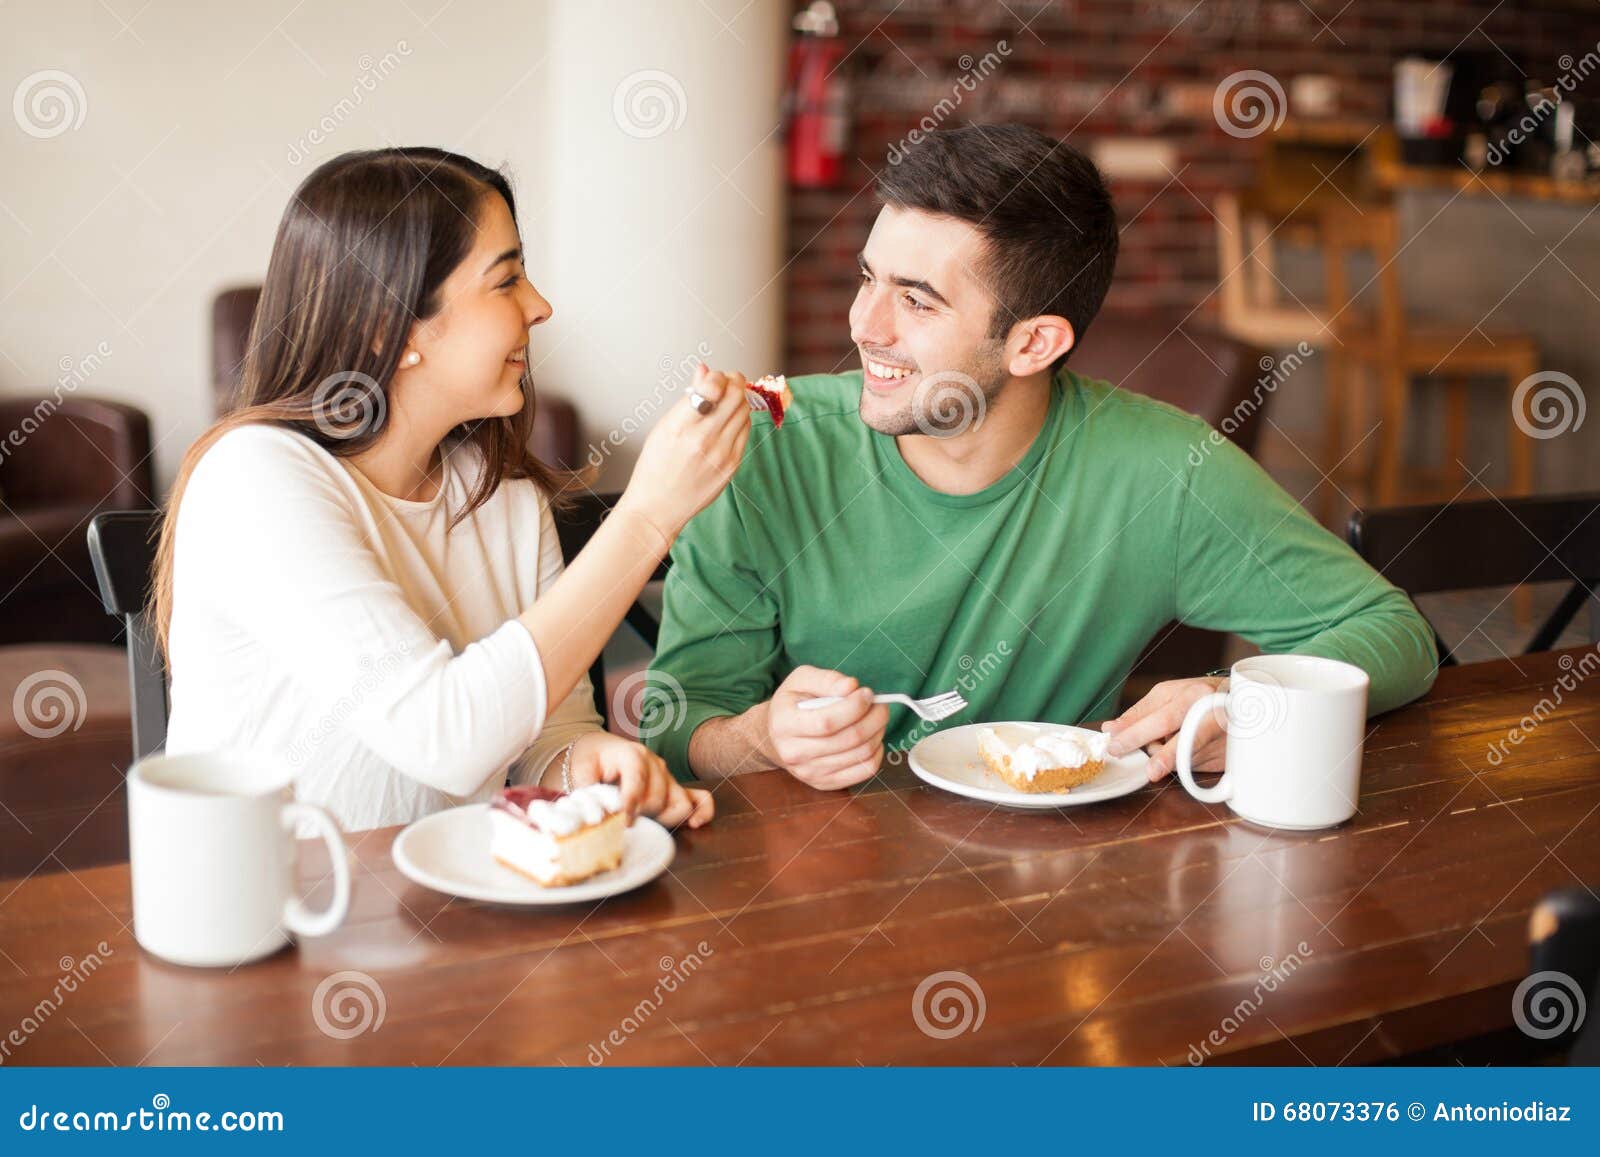 attractive-young-couple-sharing-food-cute-hispanic-having-good-time-together-coffee-shop-68073376.jpg